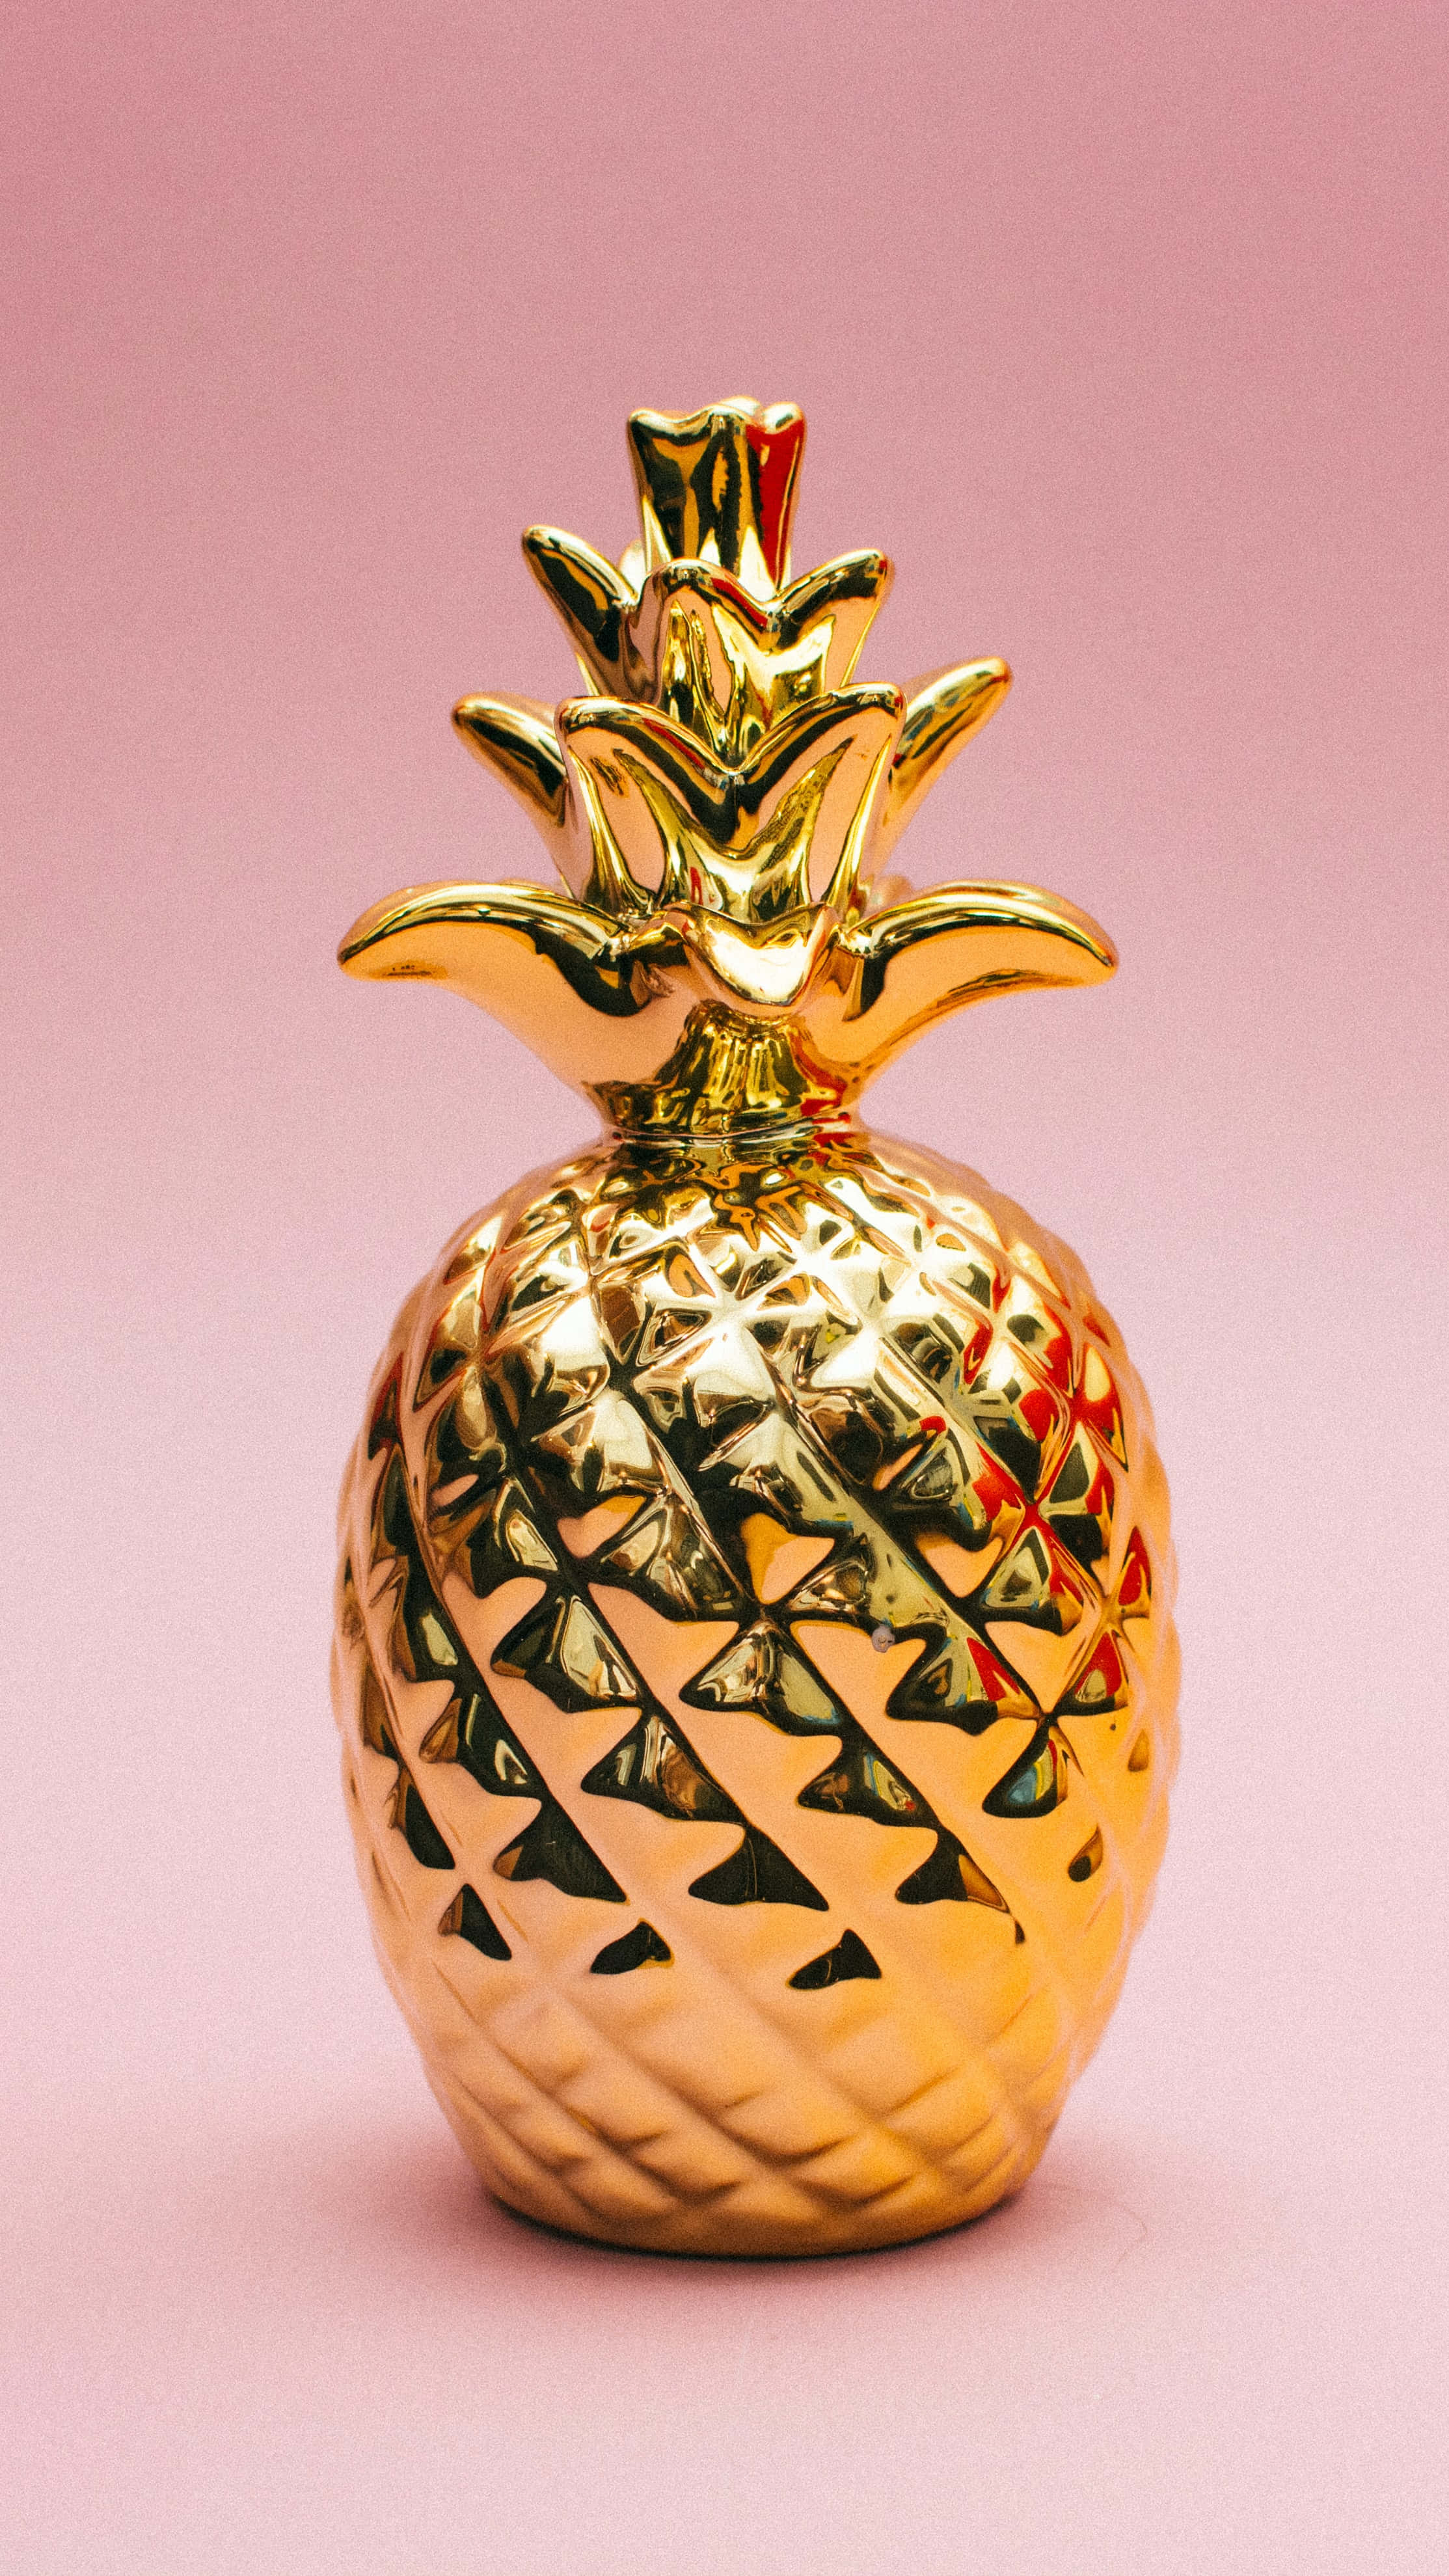 A Gold Pineapple